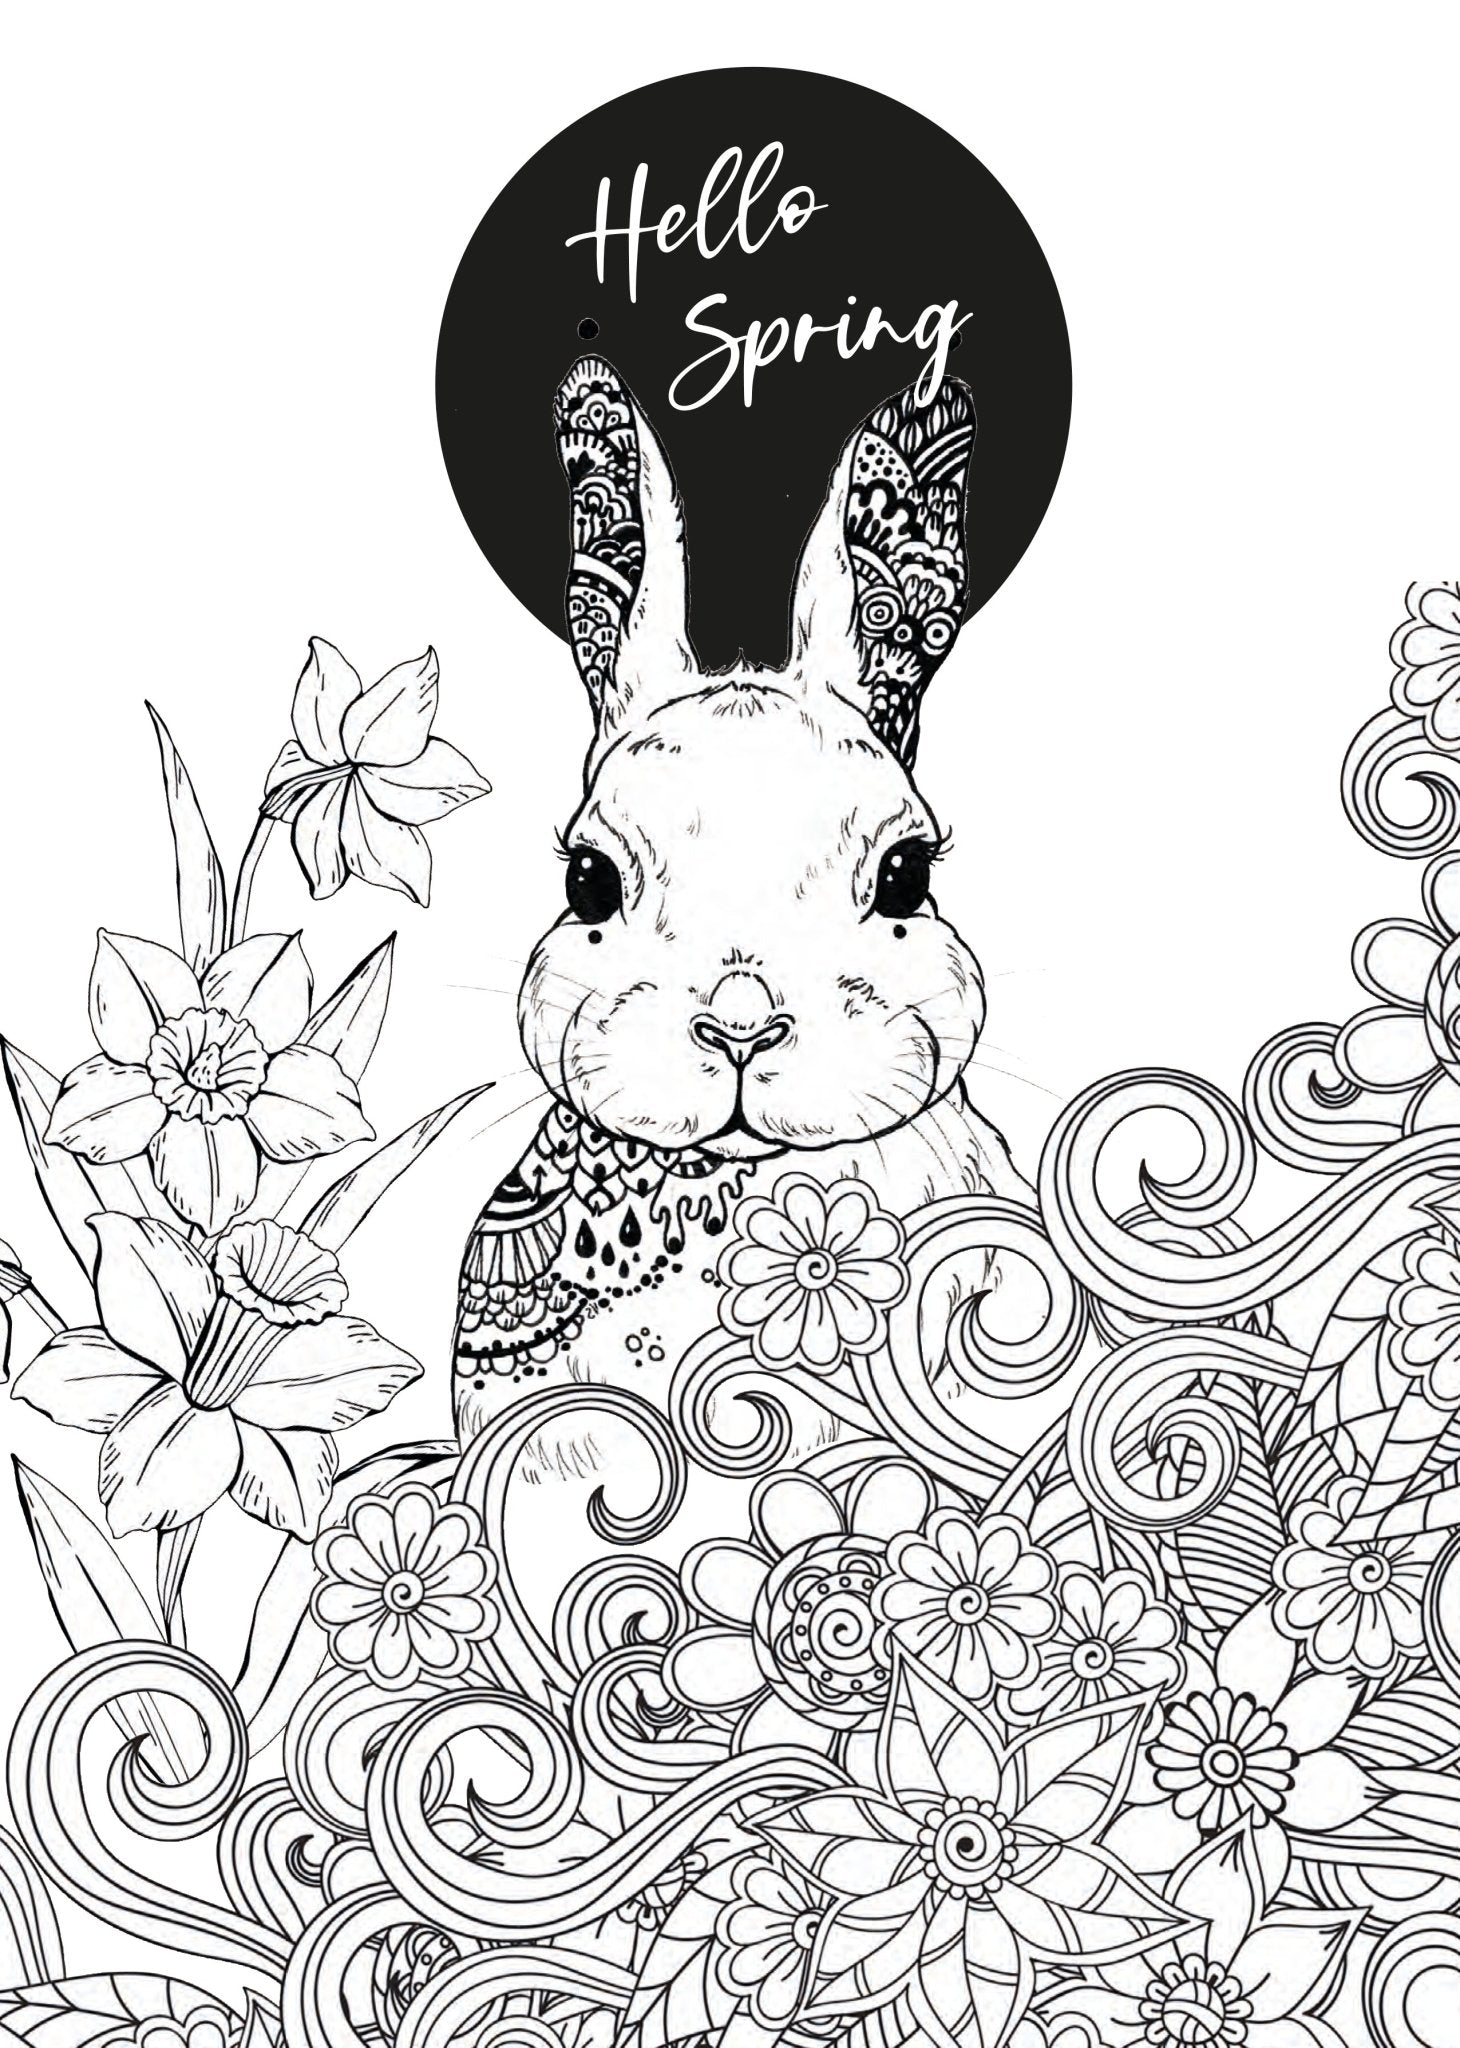 Hello Spring Coloring Book for Adults (Printbook) - Monsoon Publishing USA